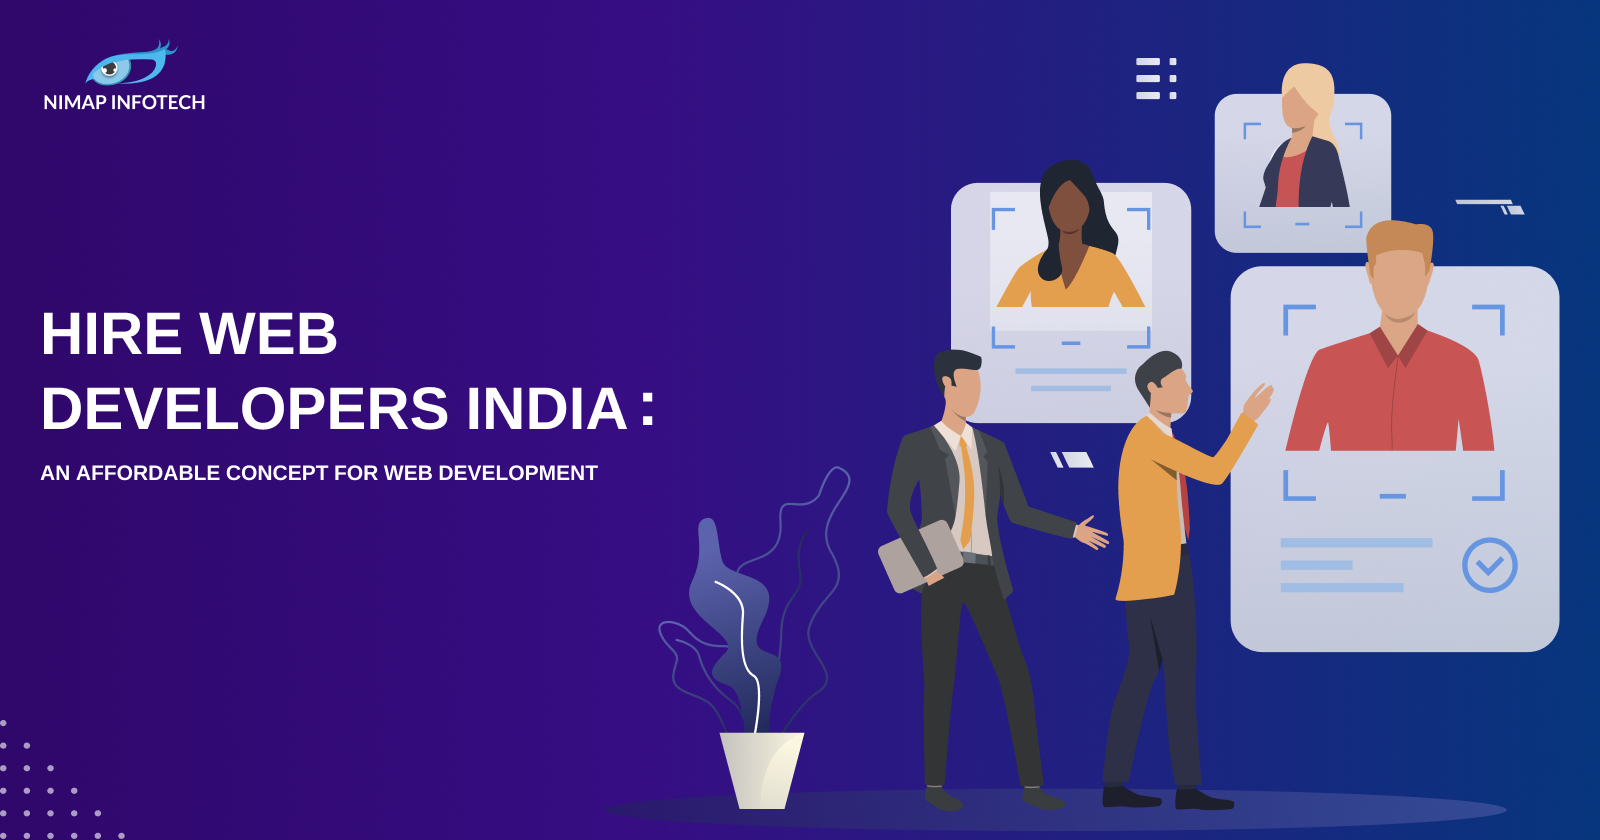 Hire Web Developers India :An Affordable Concept for Web Development